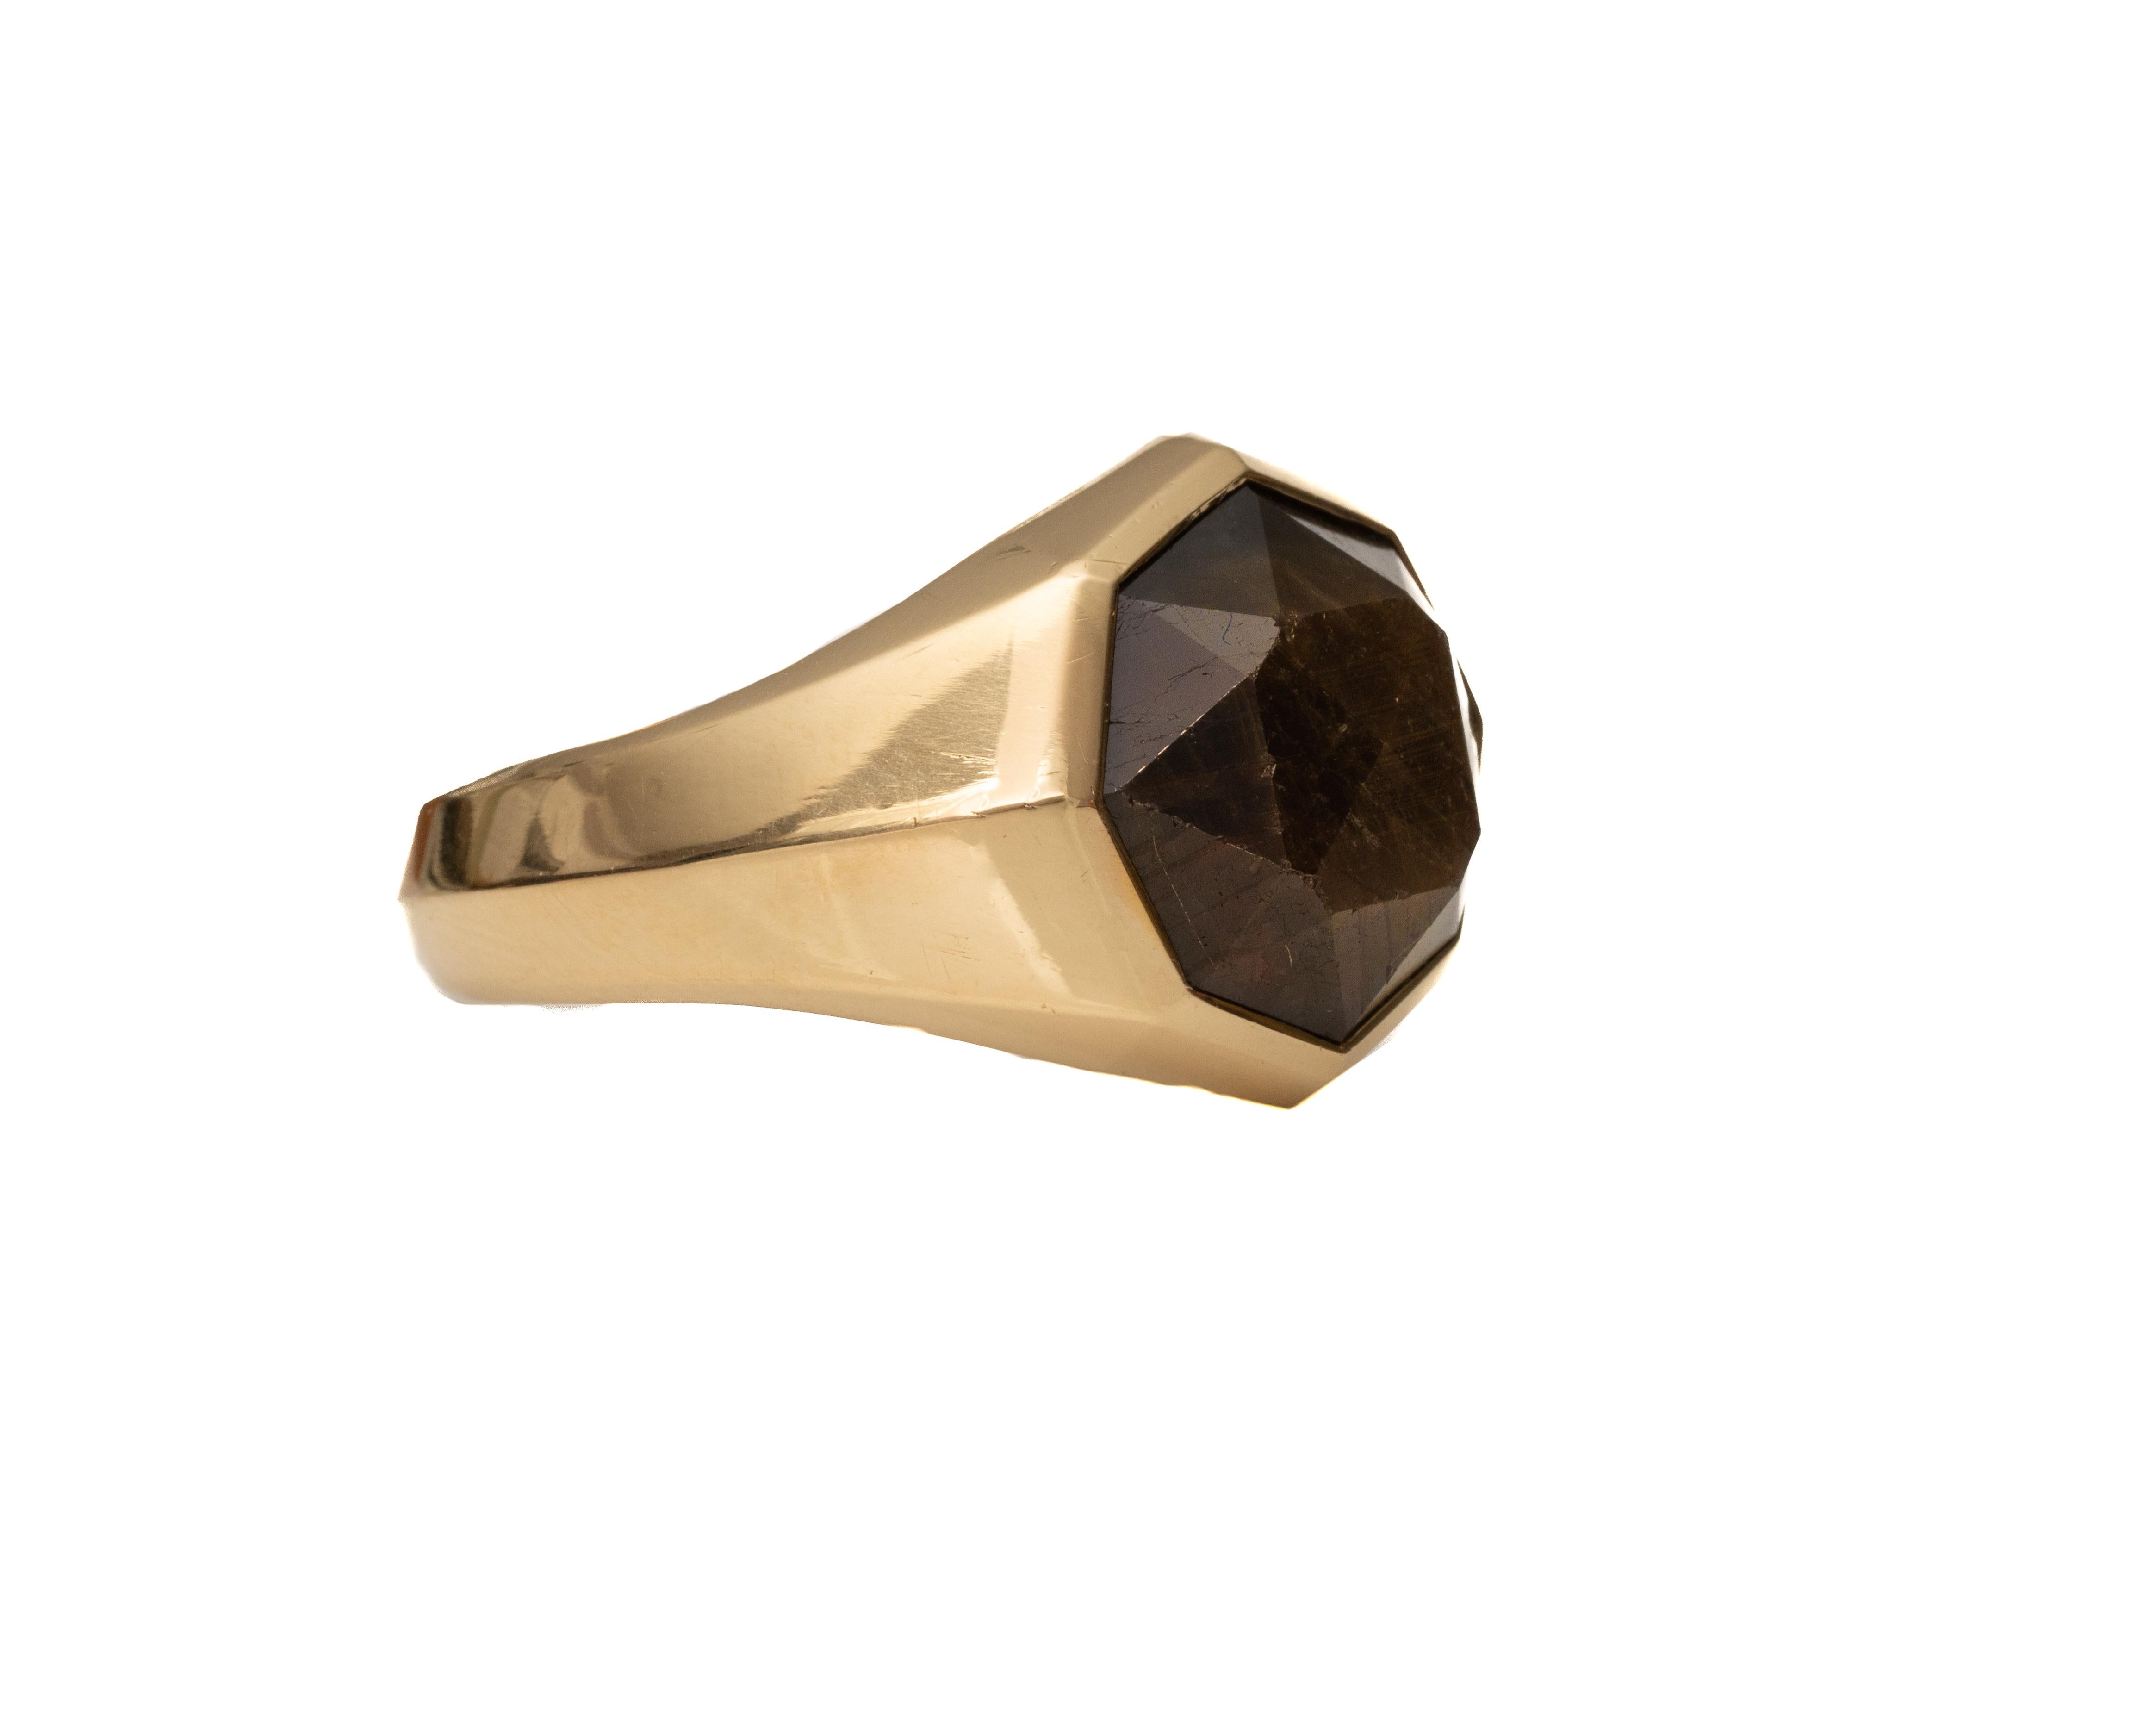 Ring Details:
Metal type: 18 karat yellow gold
Ring Size: 12 (resizable)
Weight: 21.25 grams

This David Yurman ring is from 2010 and it is both modern and stunning. It is a men's ring but can be resized to fit a smaller ring size. It features a